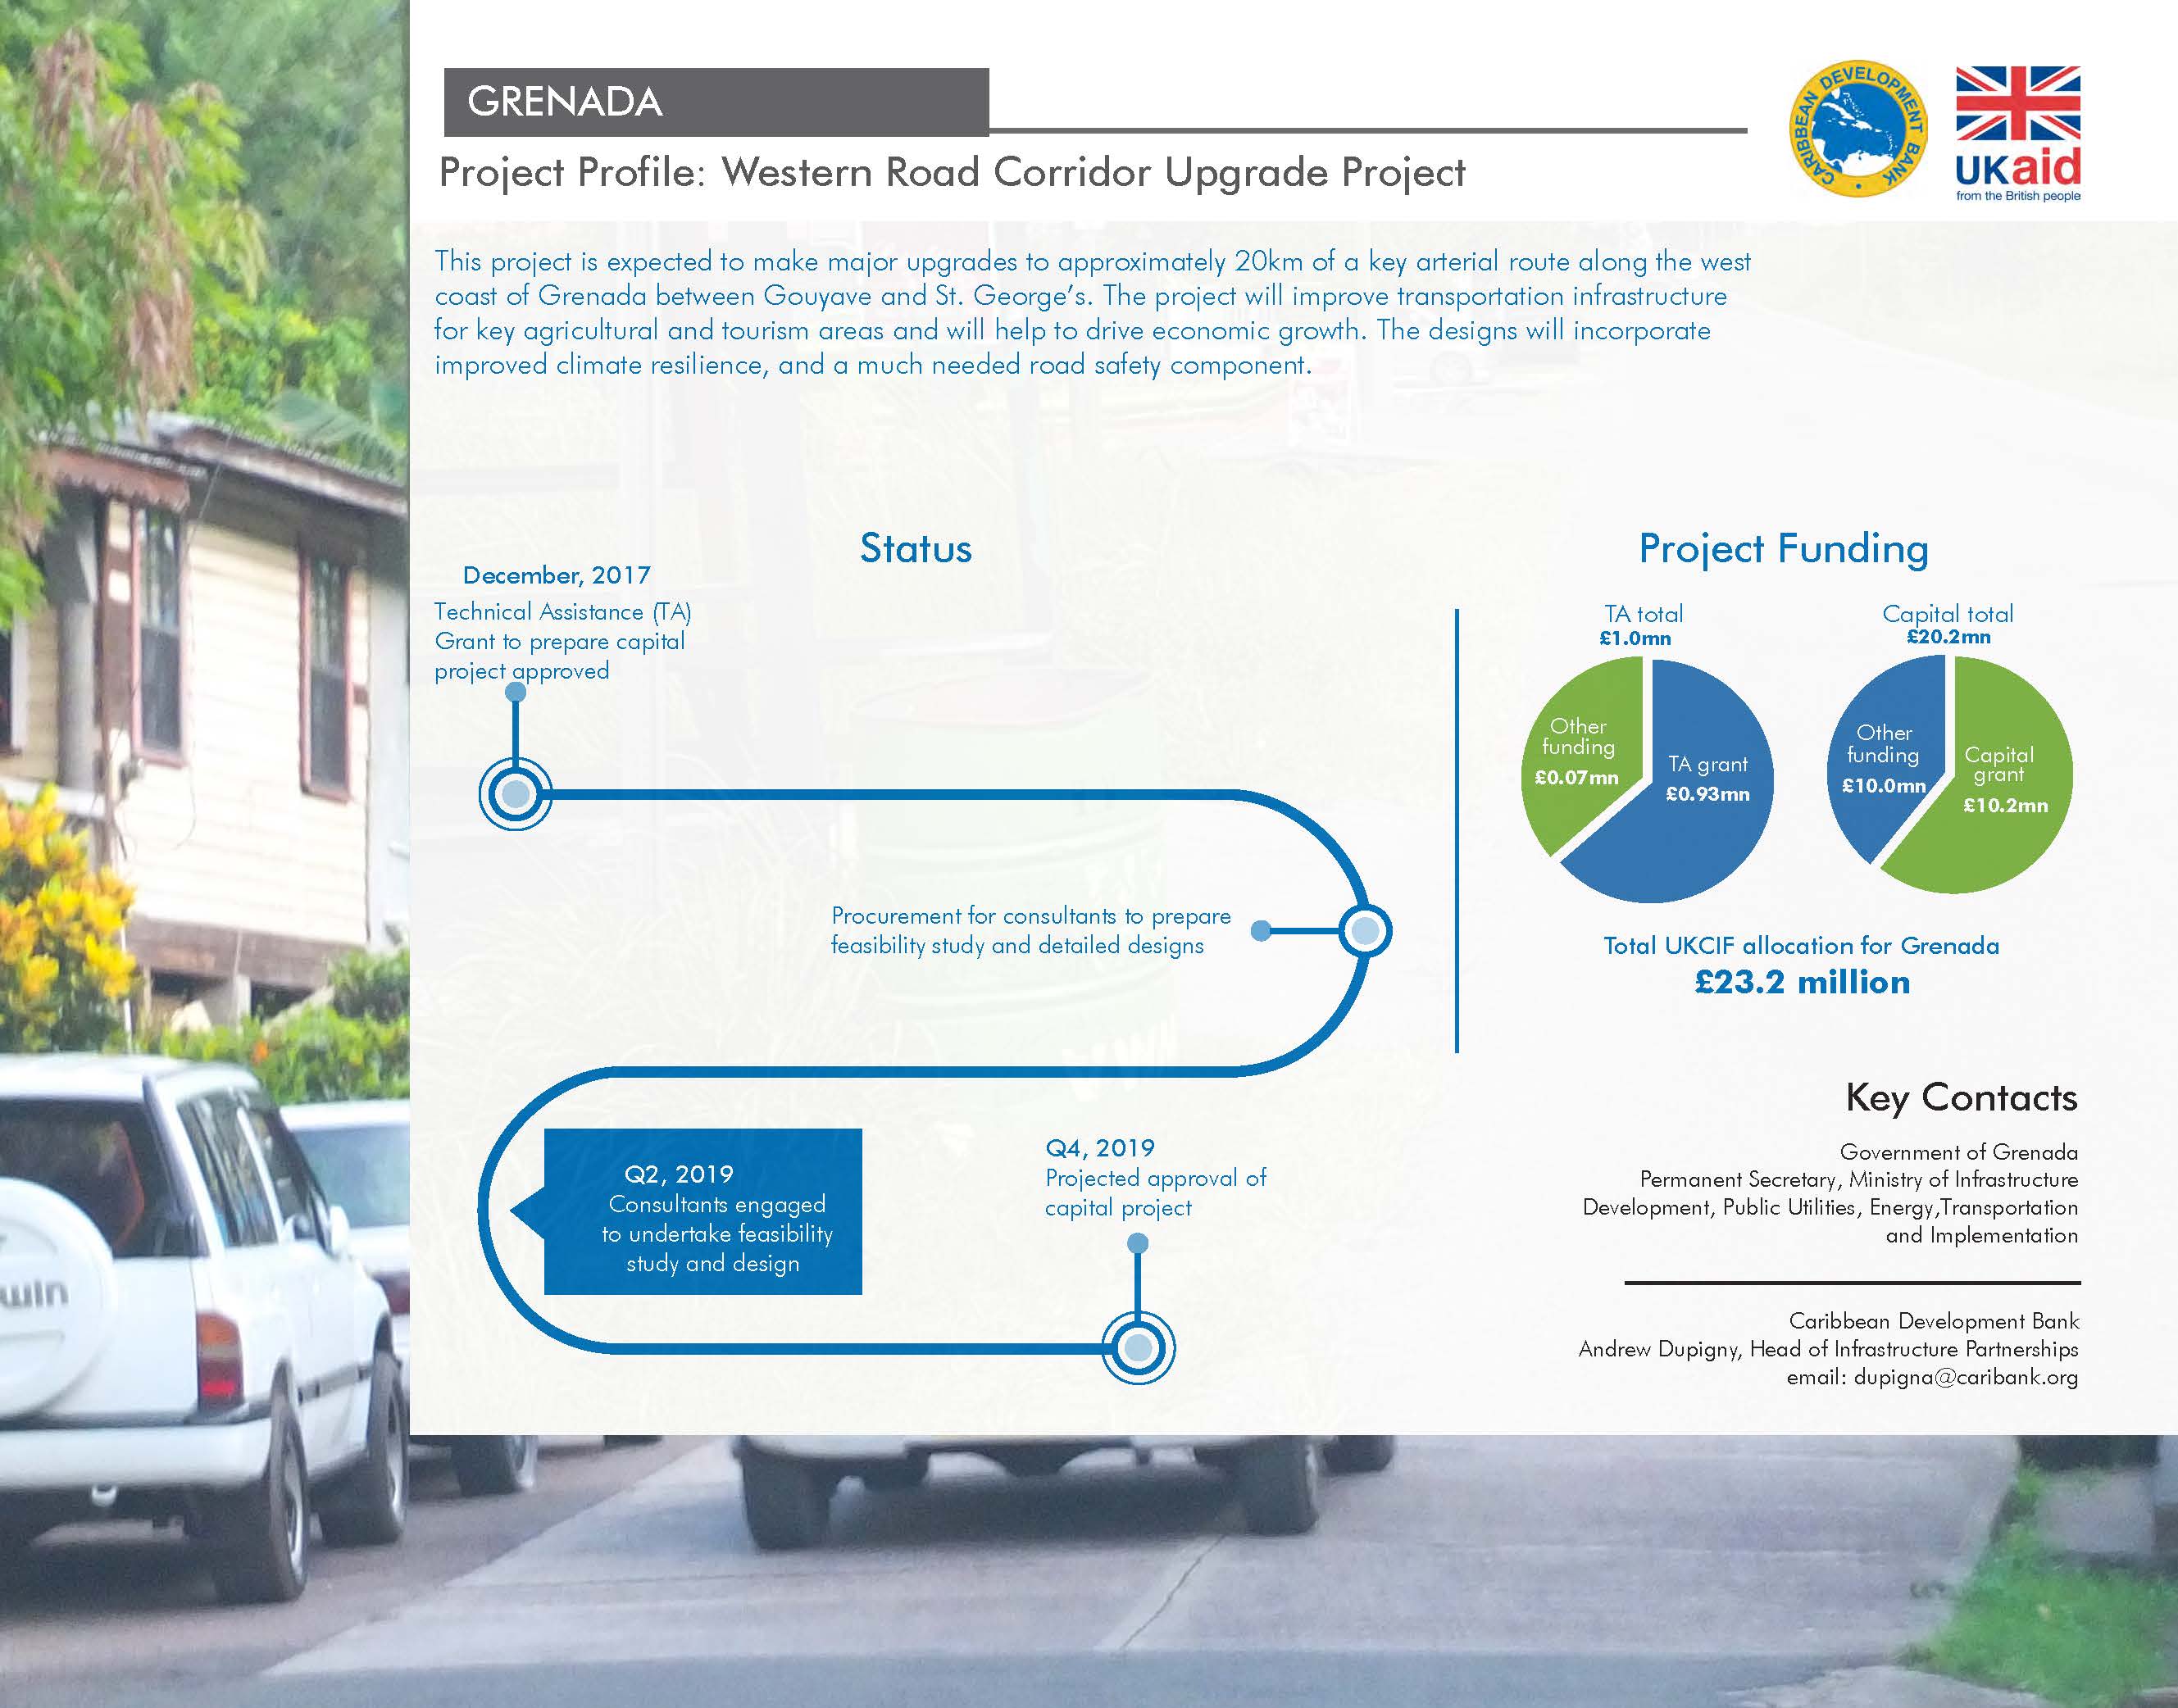 project profile with background image of a busy street with text and charts against white backdrop